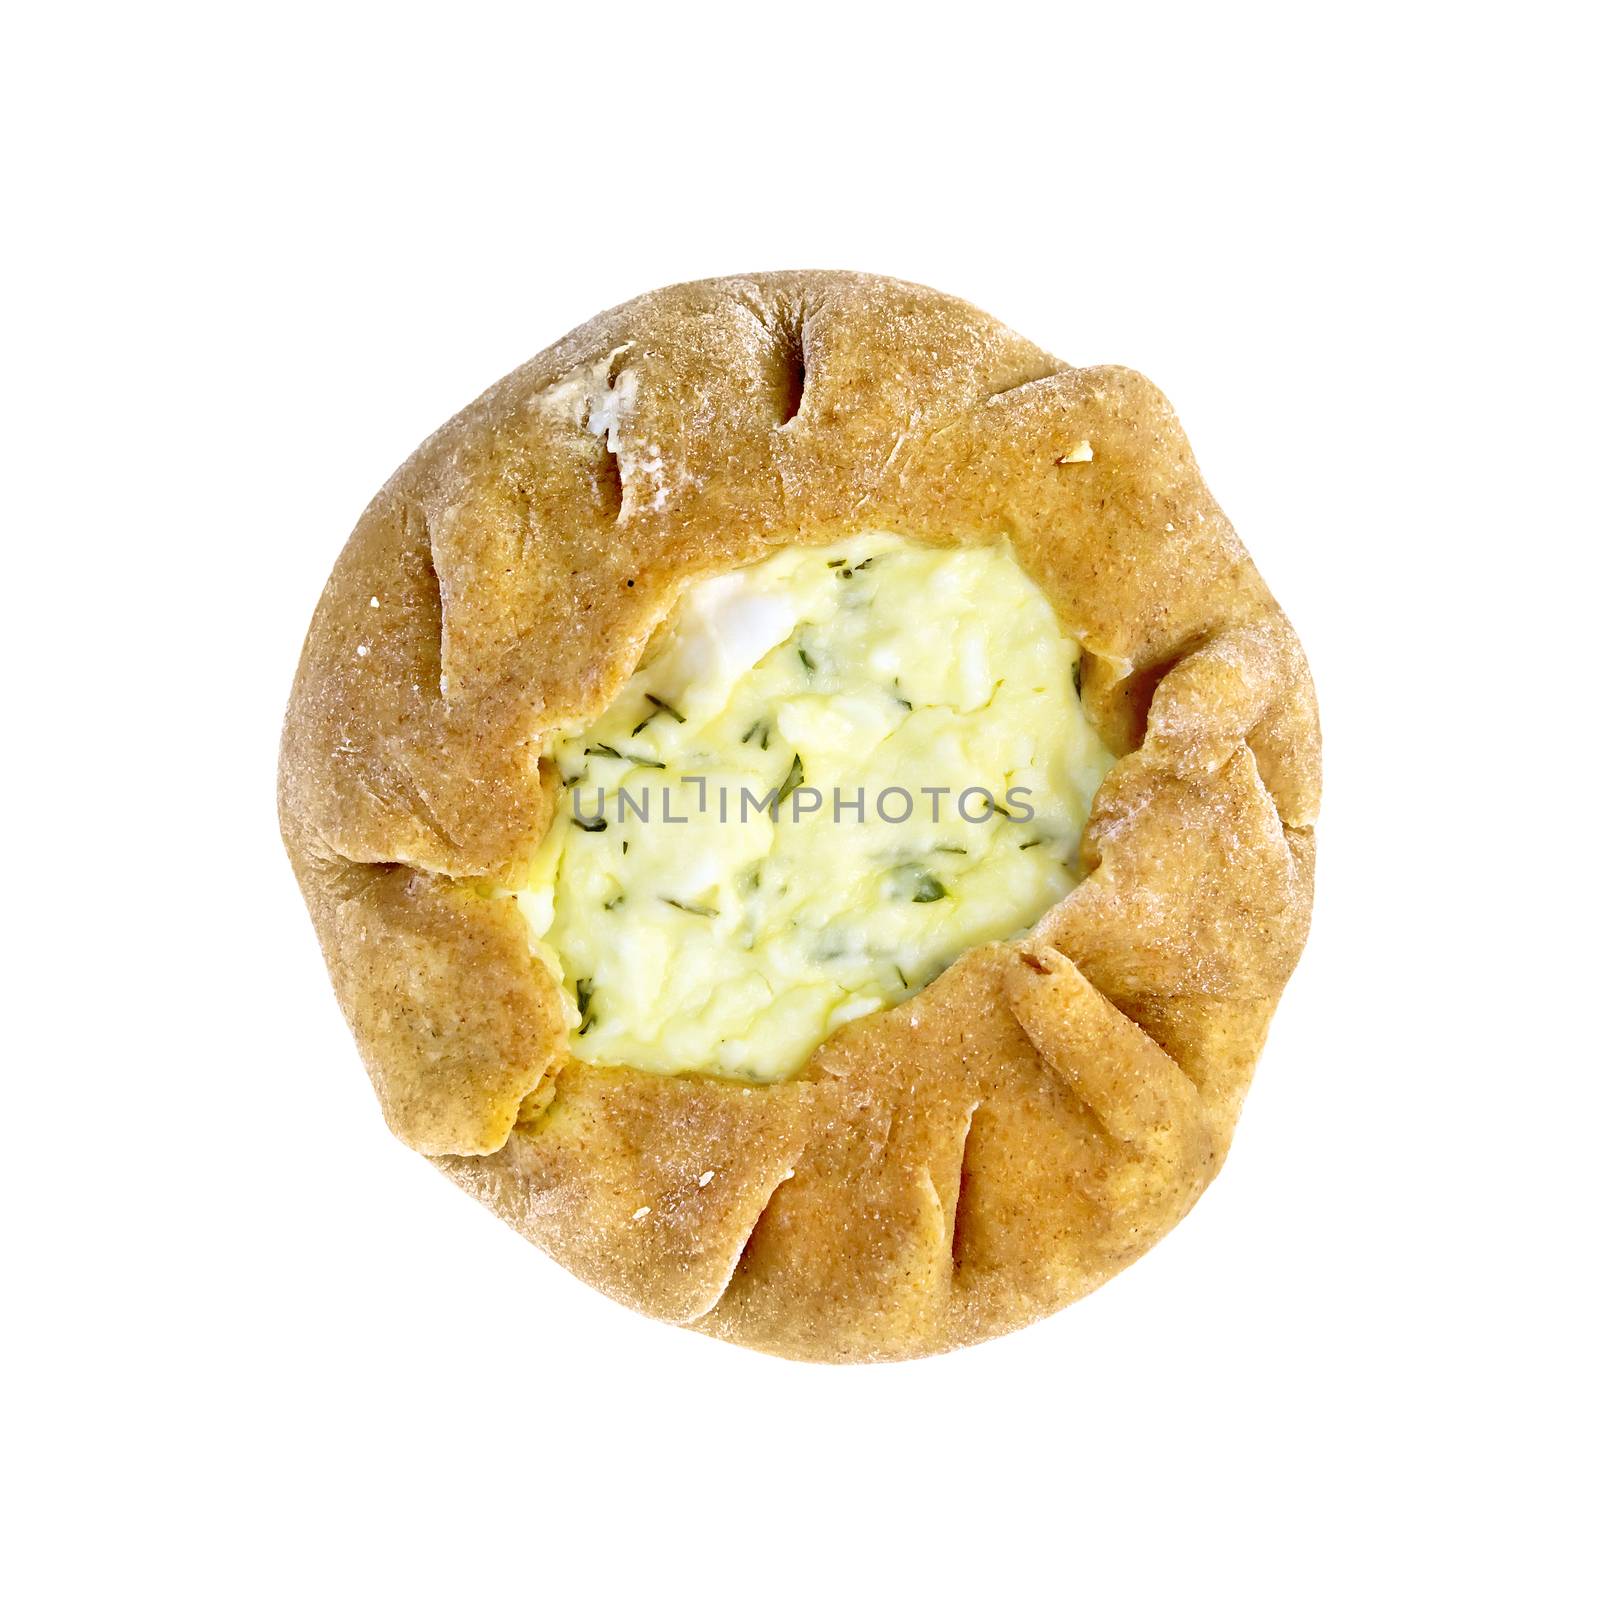 One round cheesecake carol of rye flour filled with cheese isolated on white background on top